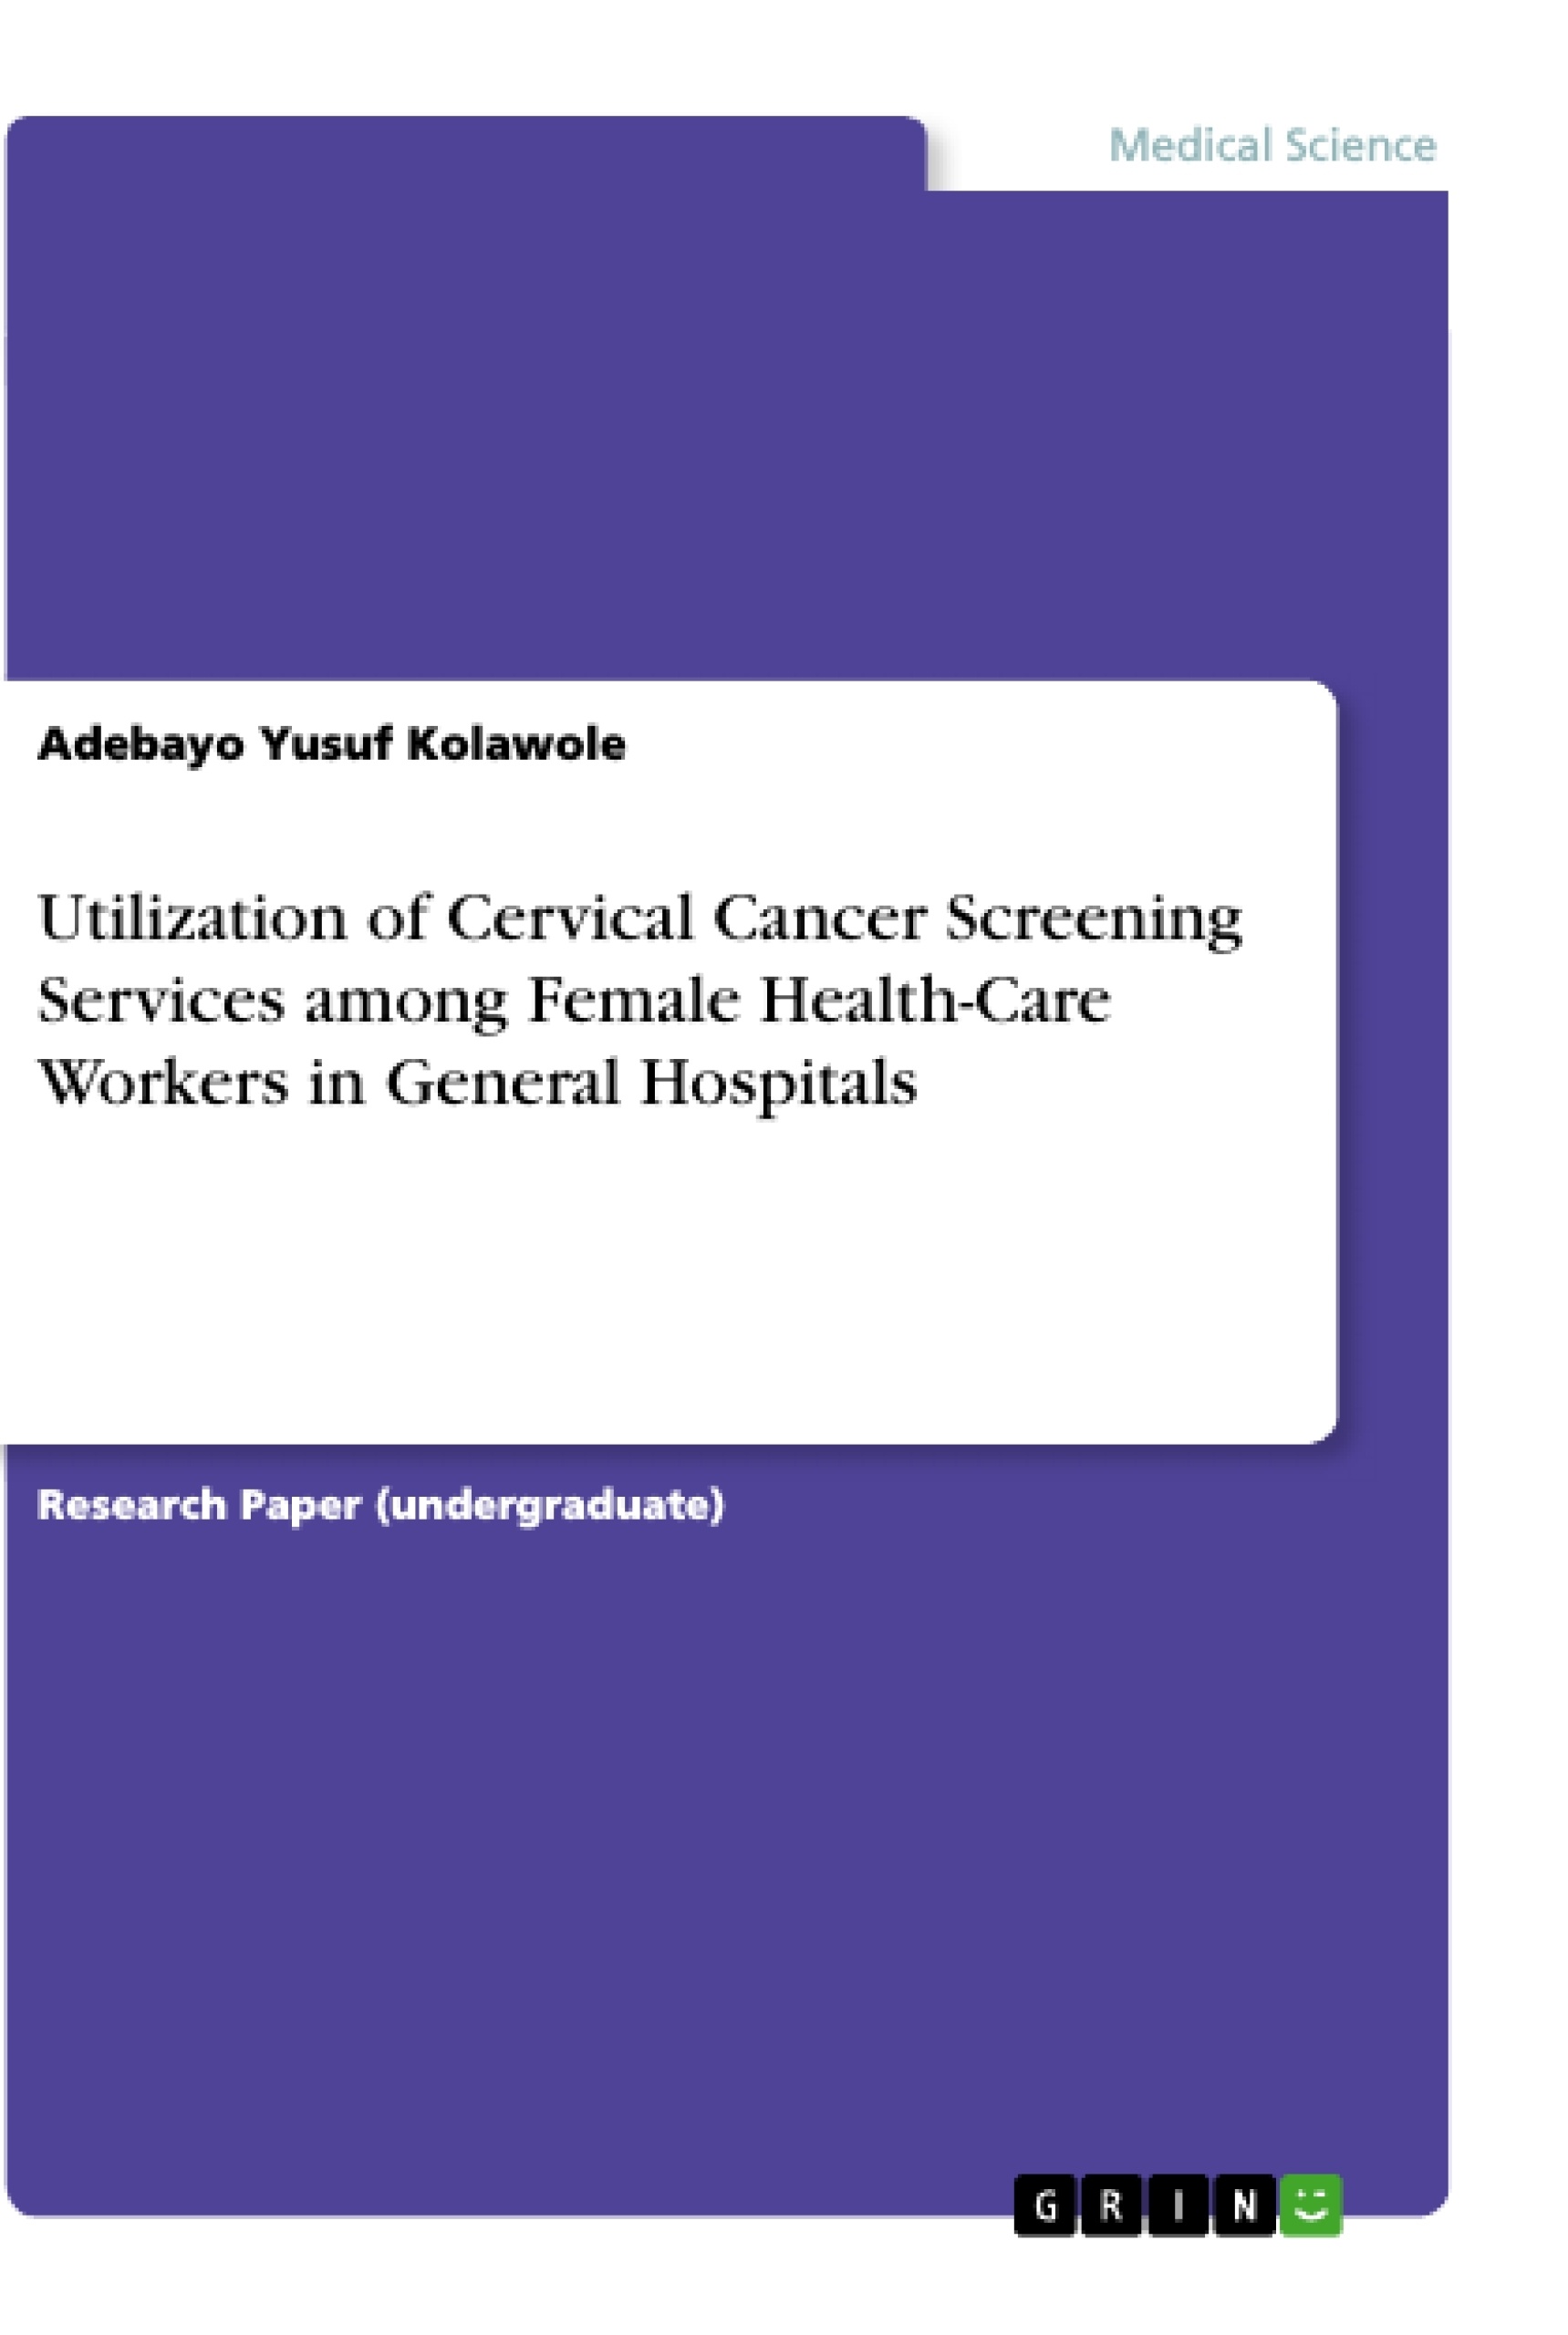 Title: Utilization of Cervical Cancer Screening Services among Female Health-Care Workers in General Hospitals